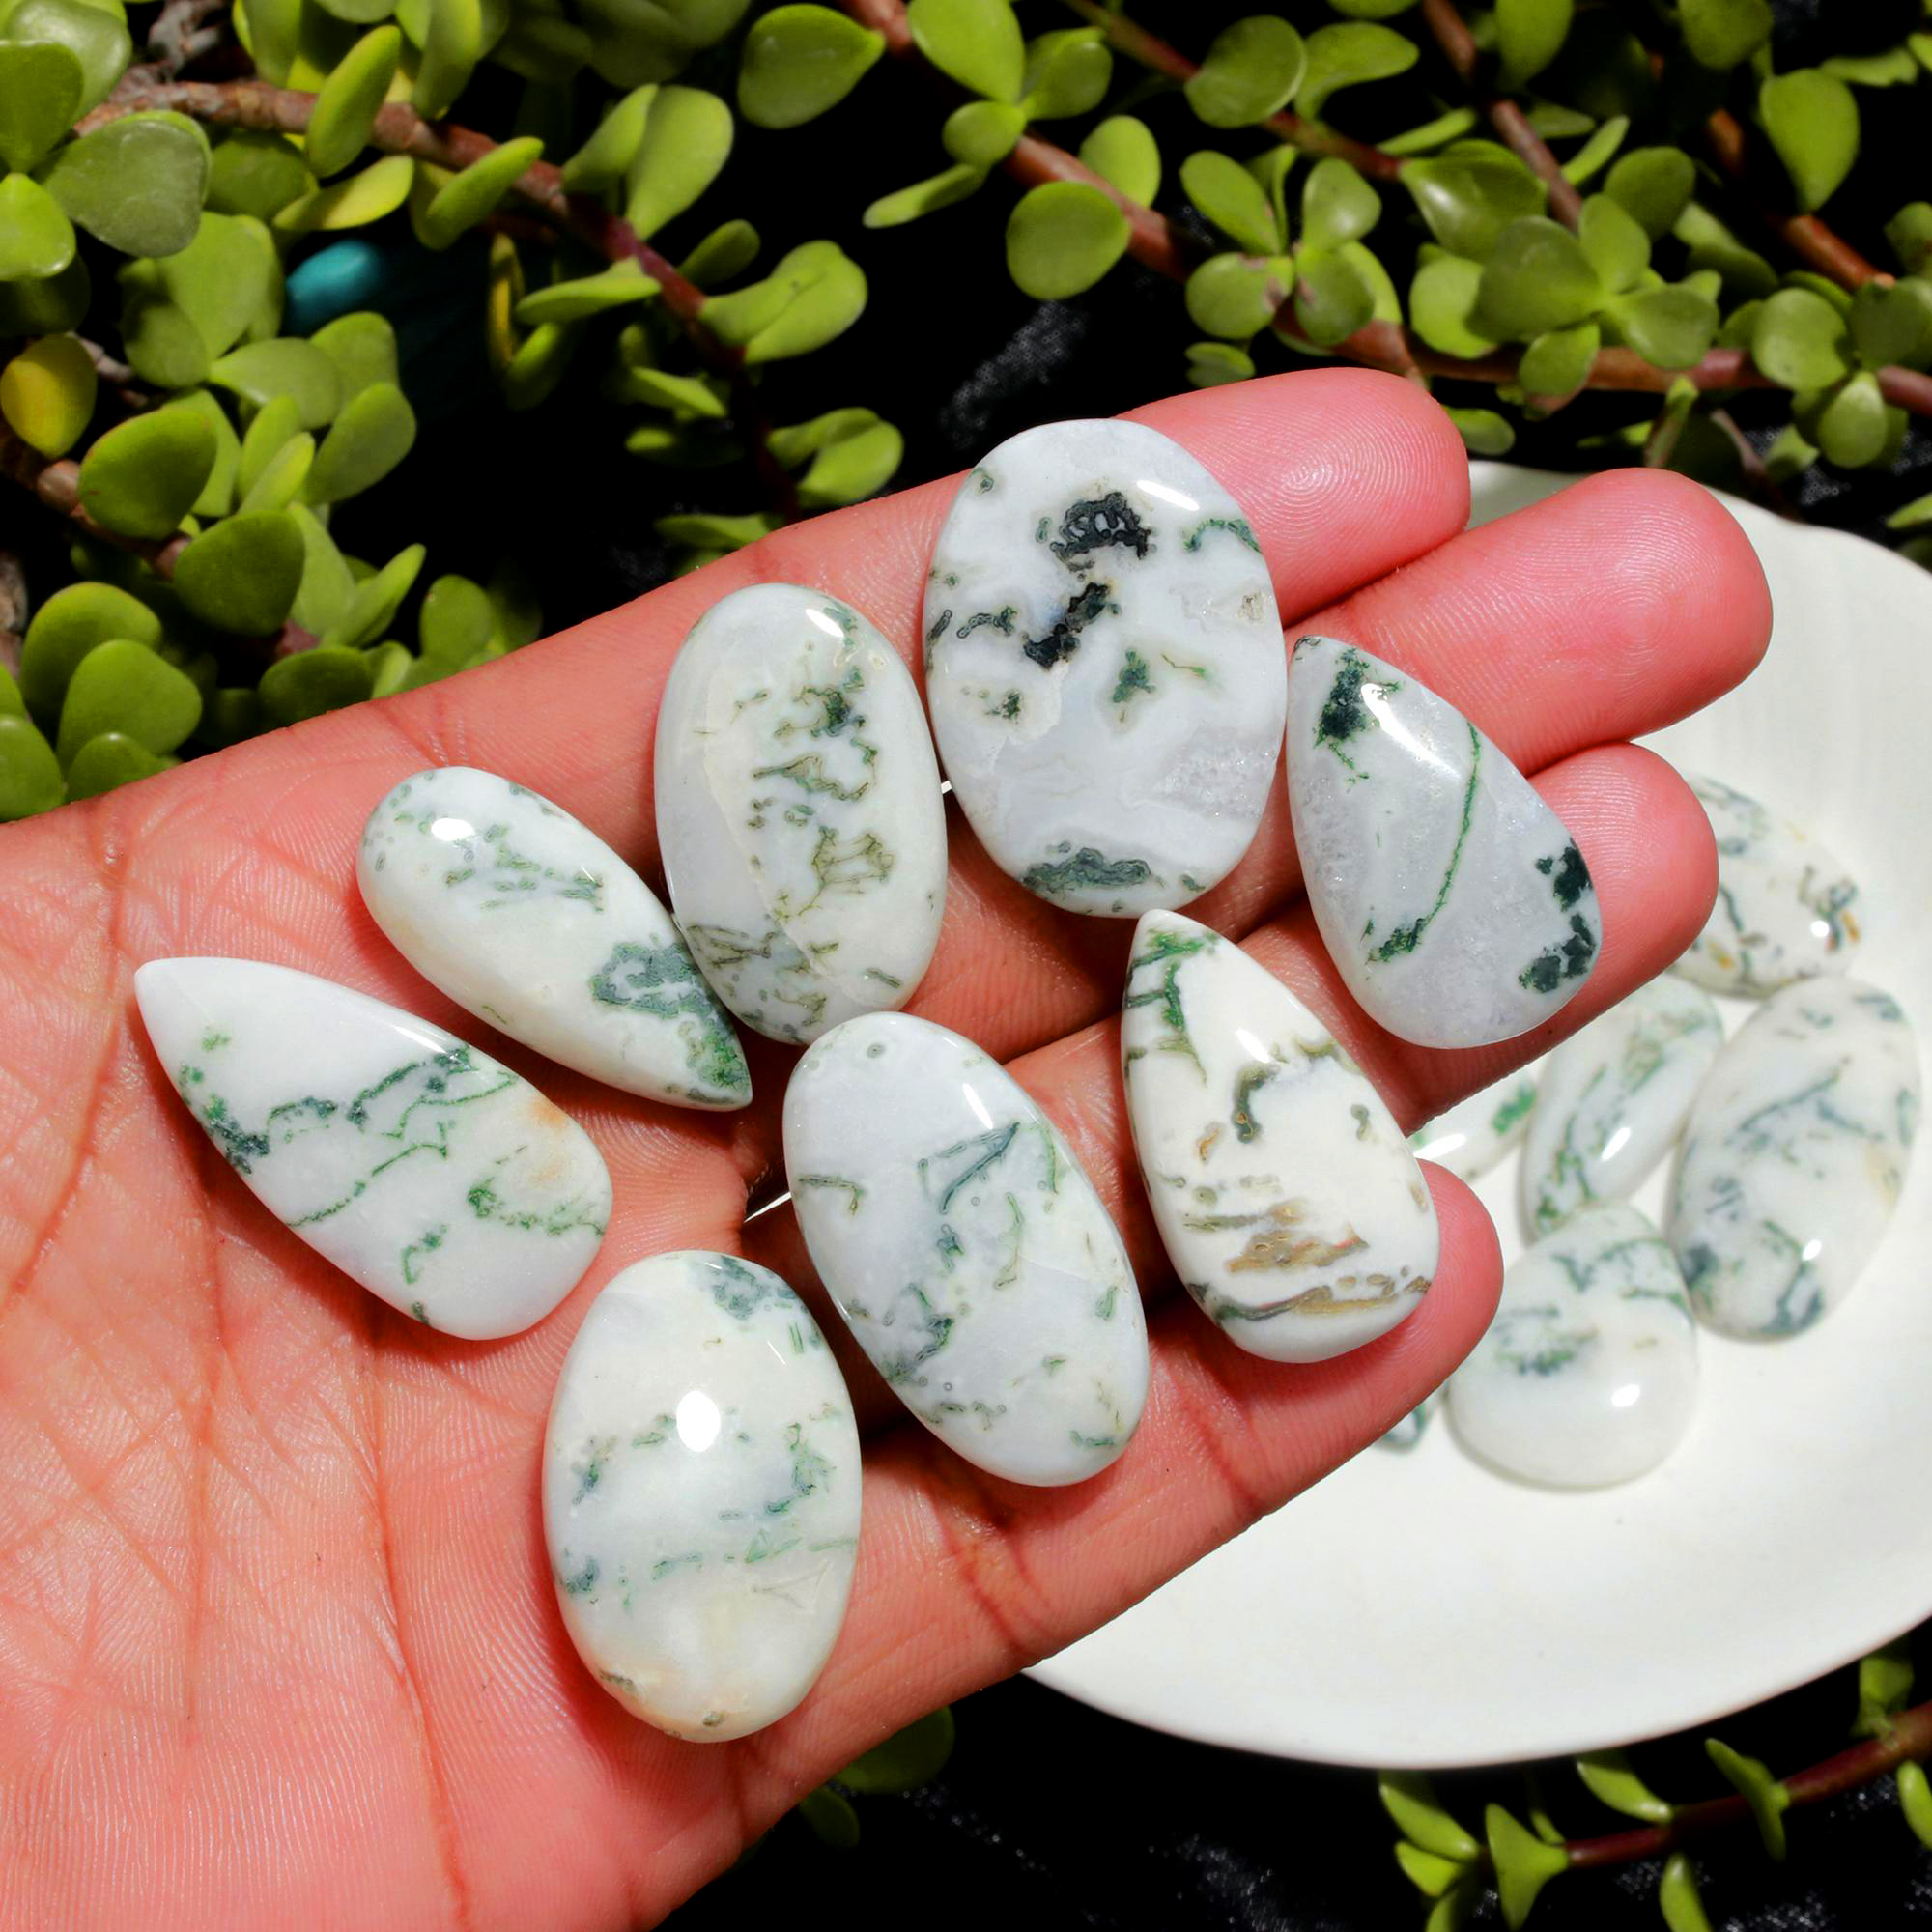 21Pcs 540CTS Natural Tree Agate Cabochon Loose Gemstone Wholesale Lot Size 38x20 27x16mm